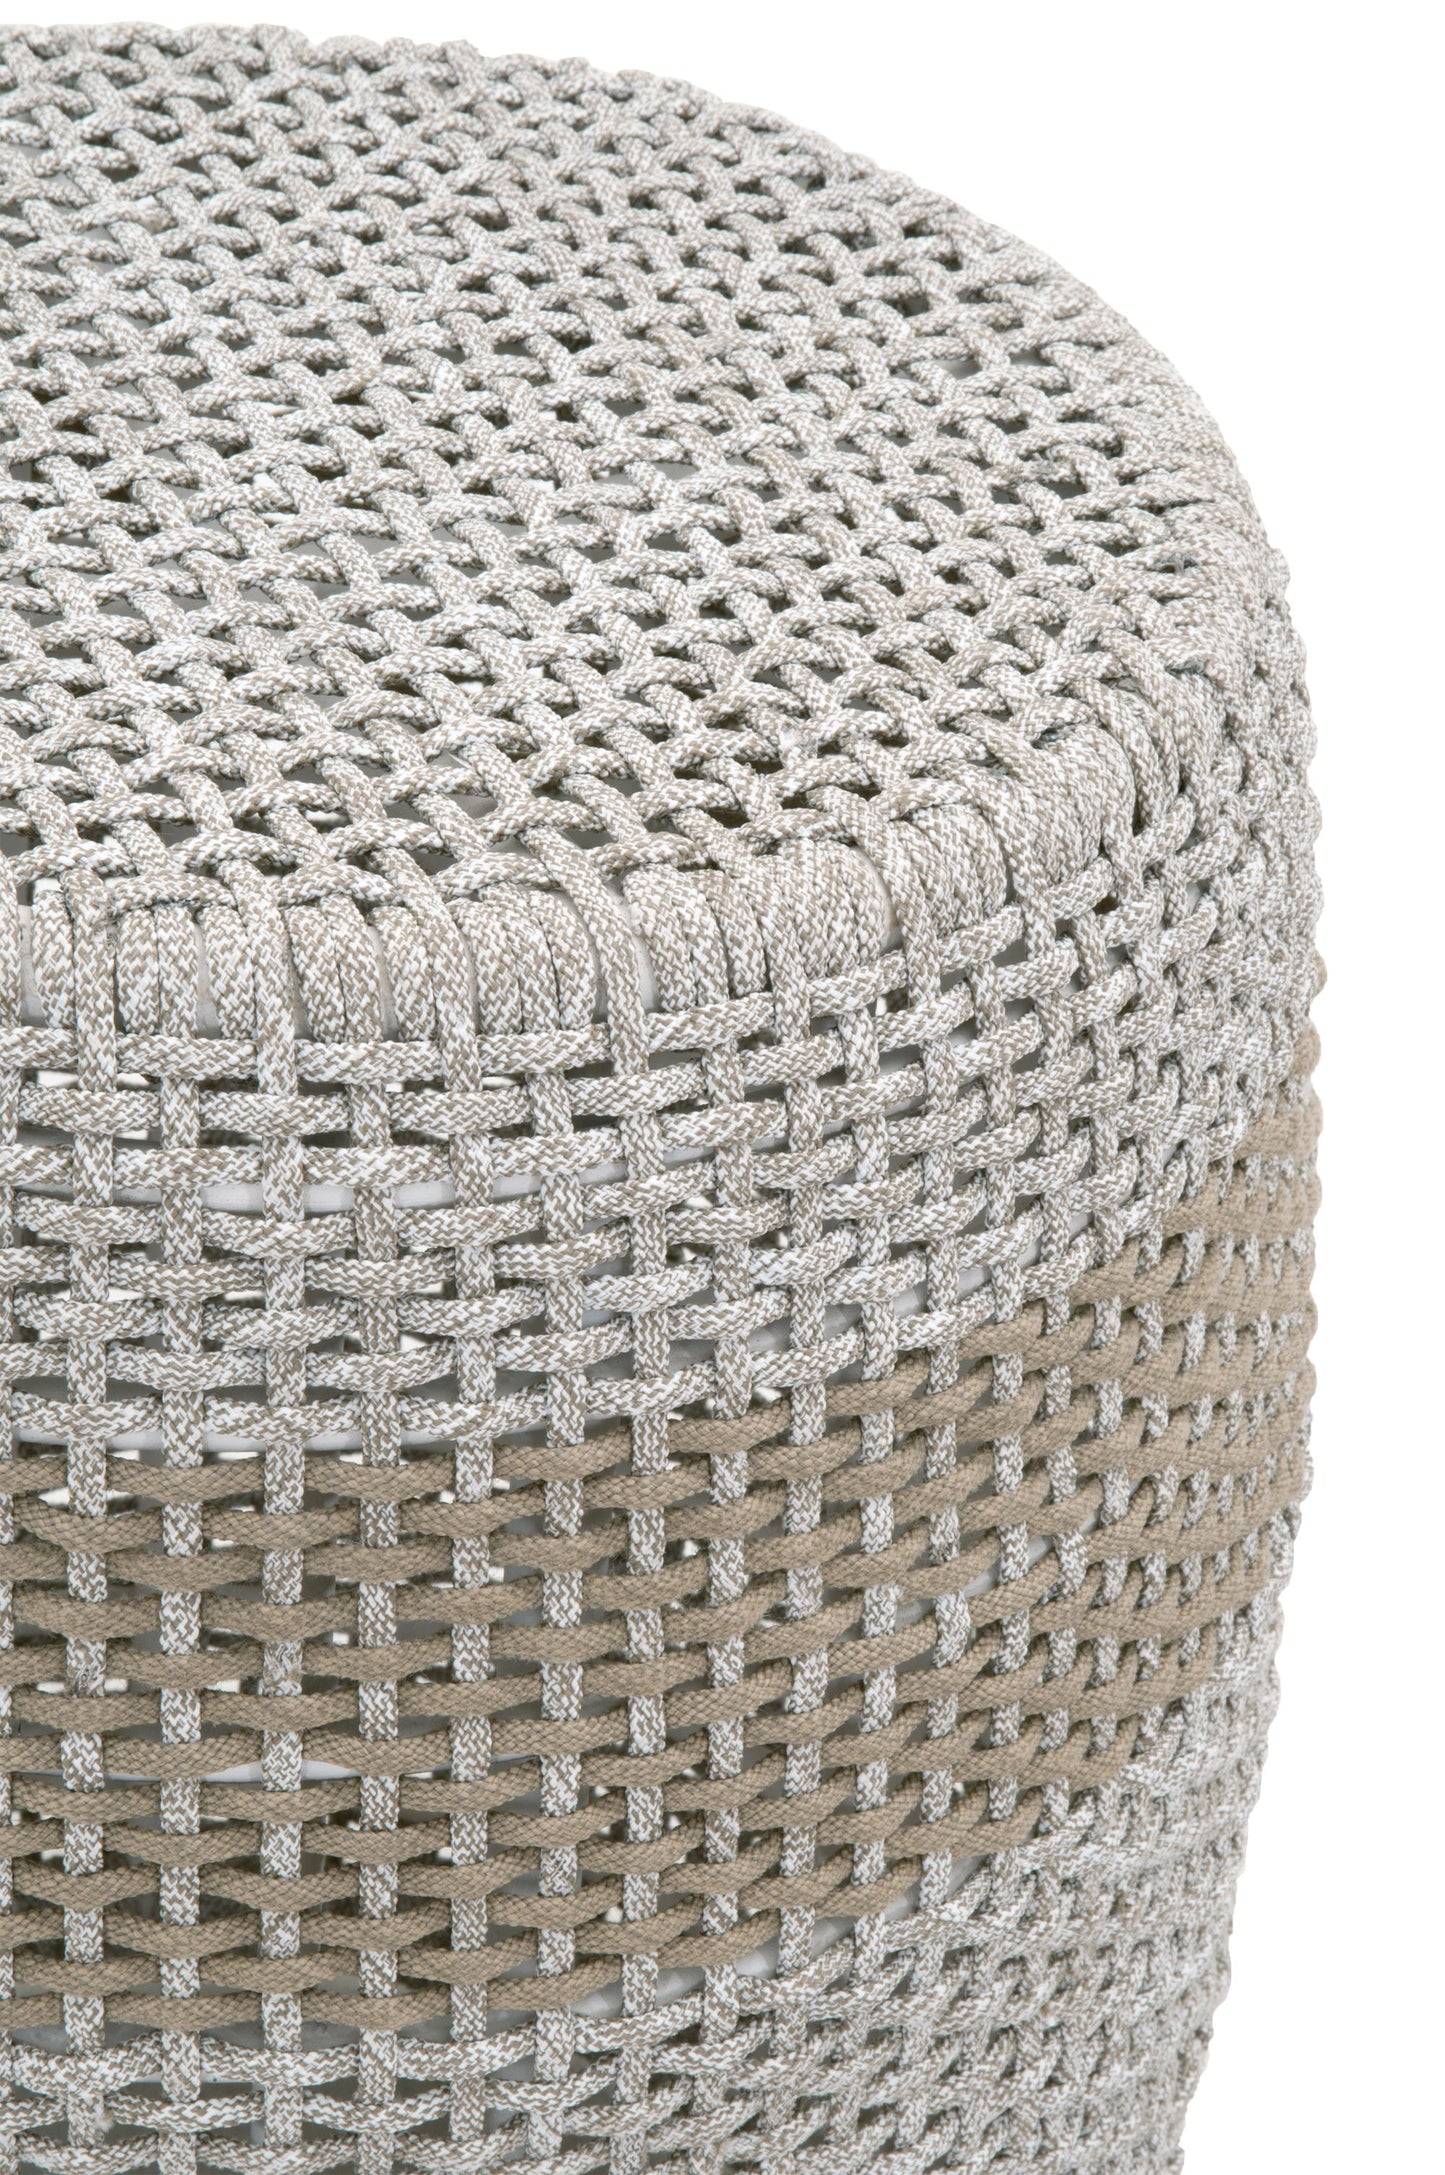 17" Taupe and White Woven Indoor or Outdoor End Table